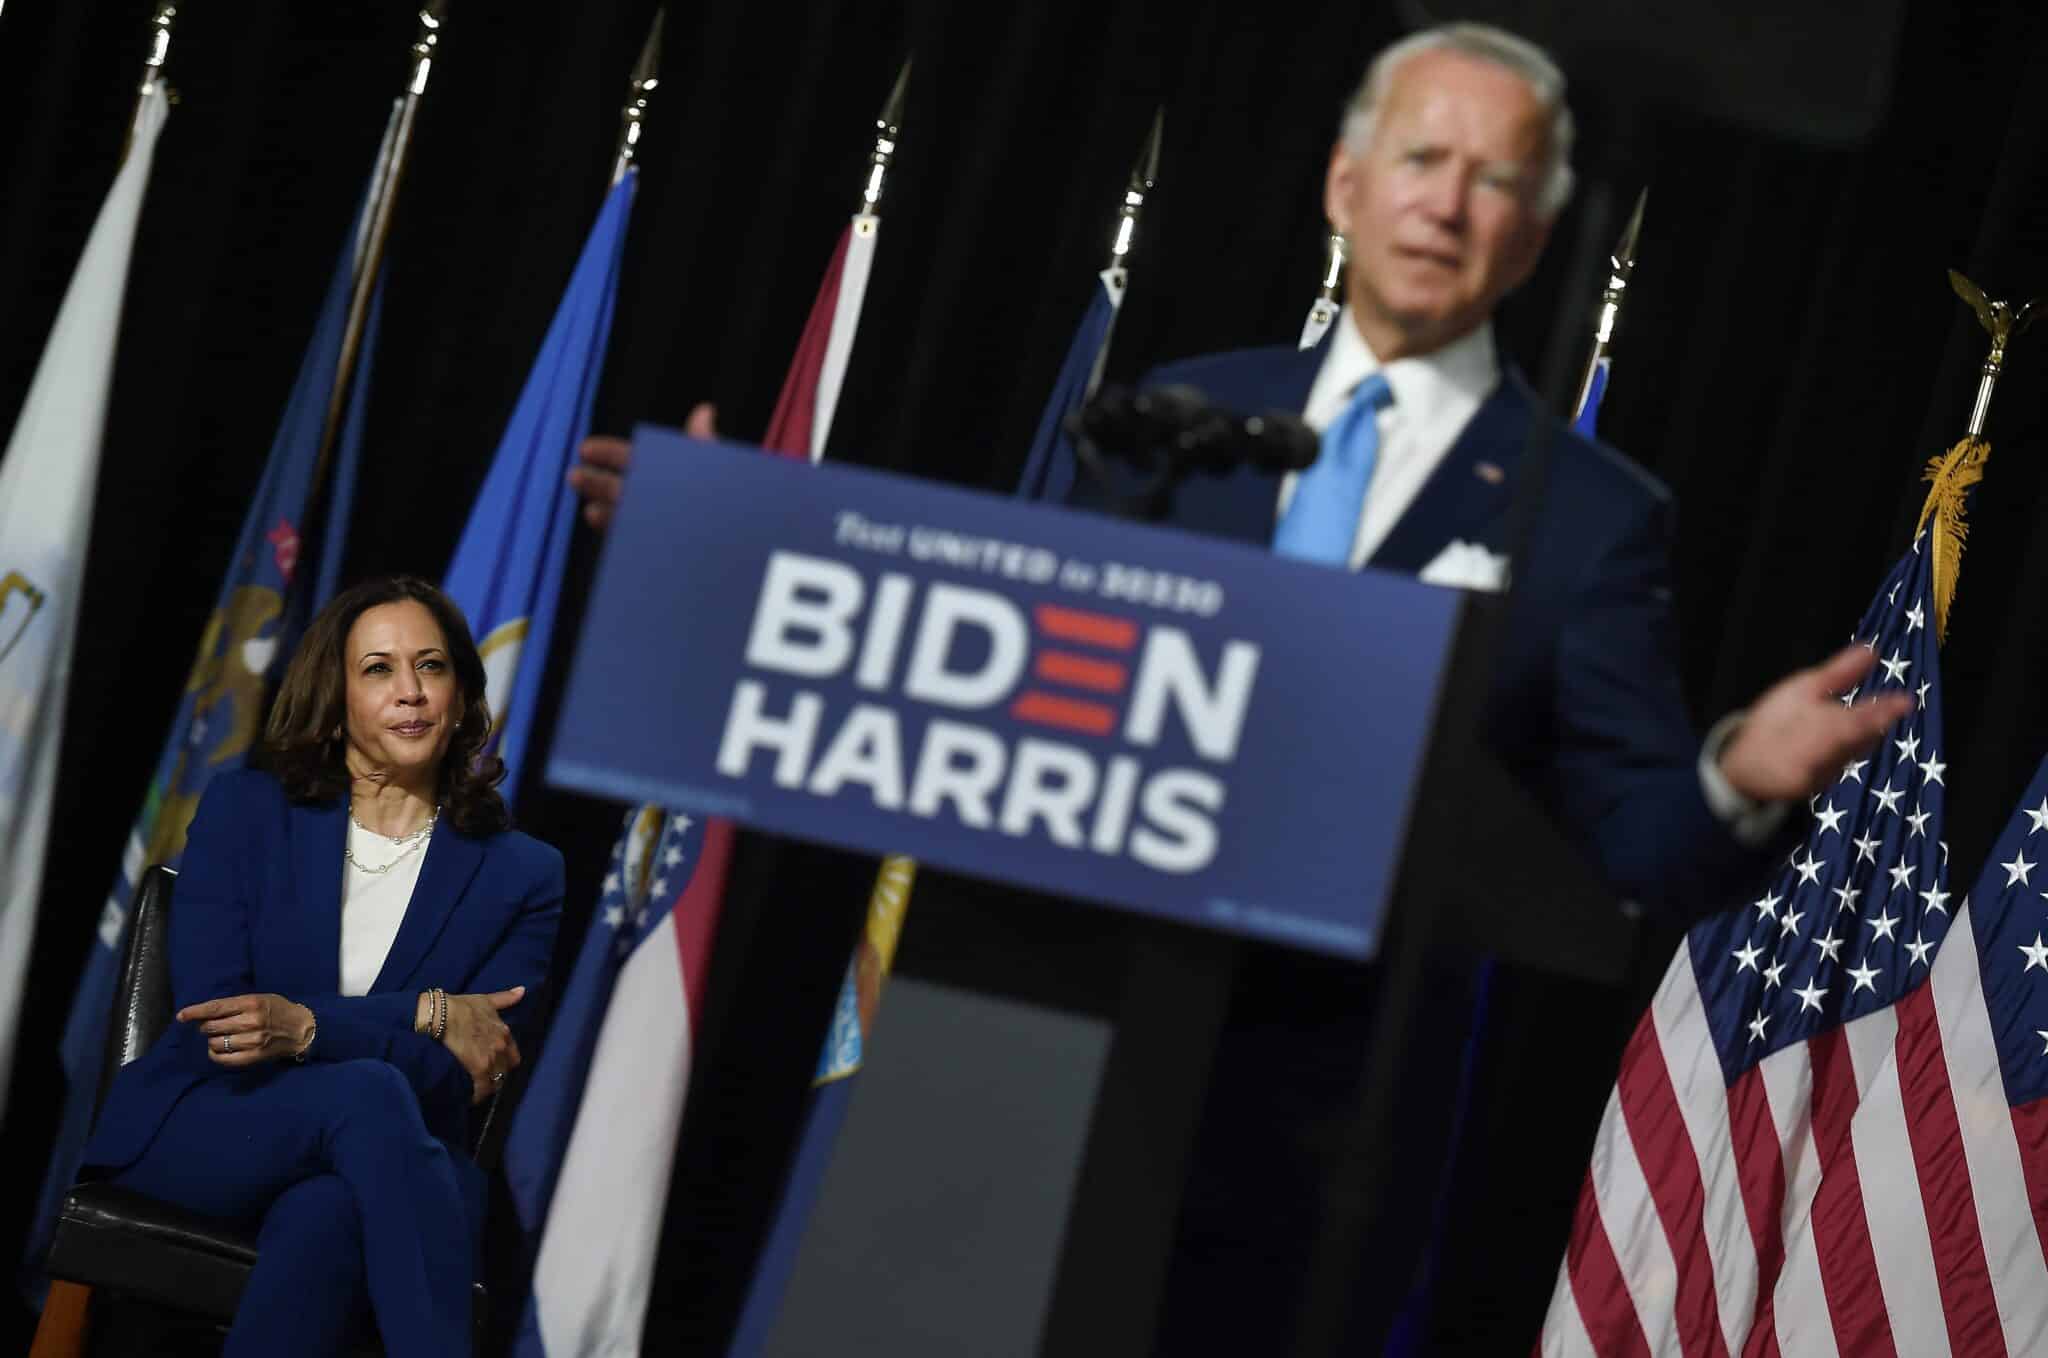 Democratic vice presidential running mate, US Senator Kamala Harris, listens to presidential nominee and former US Vice President Joe Biden speak during their first press conference together in Wilmington, Delaware, on August 12, 2020. (Photo by Olivier DOULIERY / AFP) (Photo by OLIVIER DOULIERY/AFP via Getty Images)